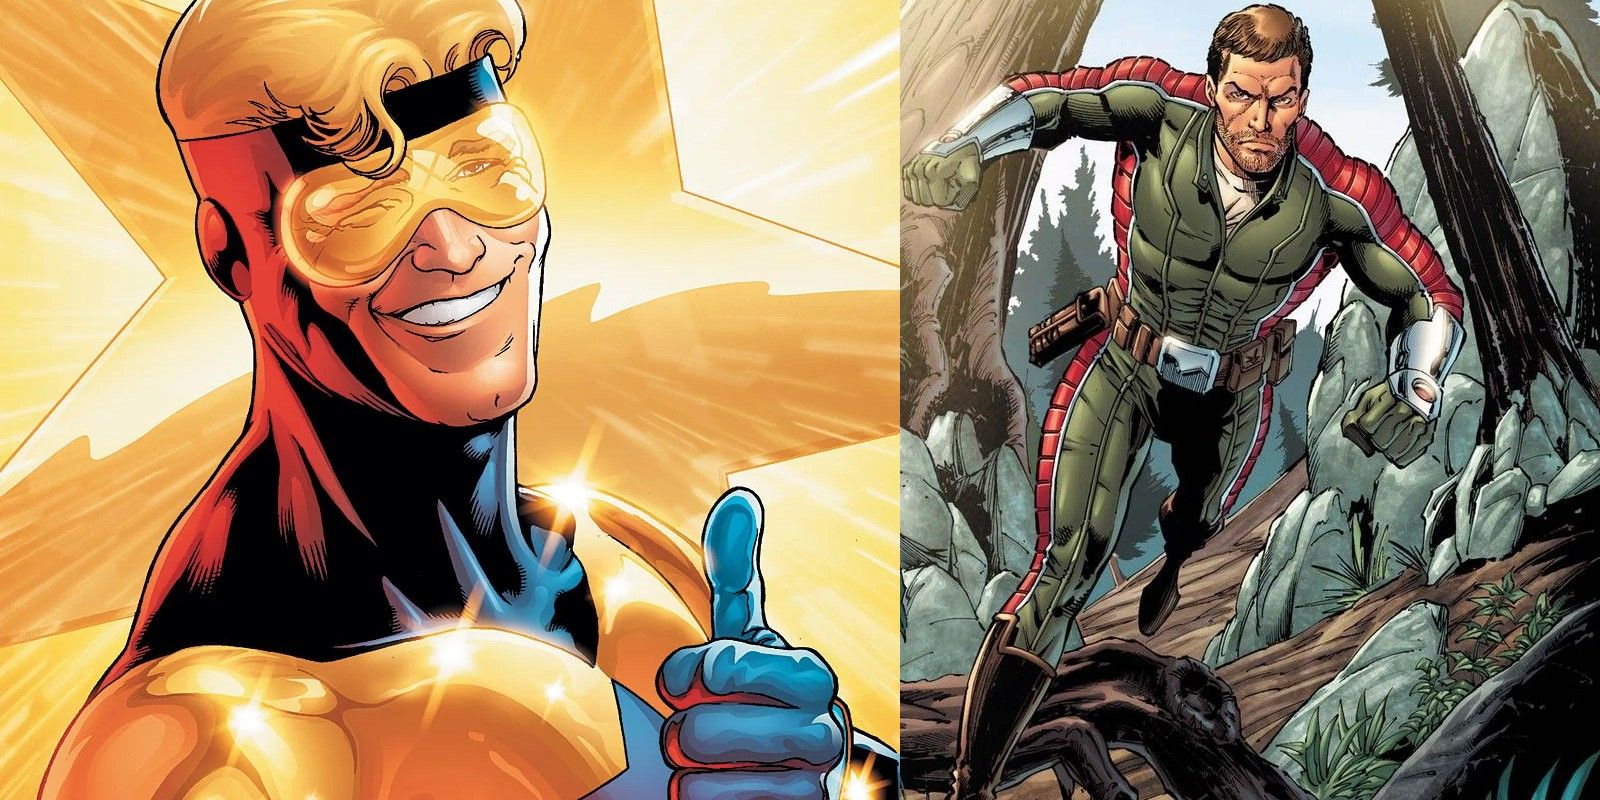 split image: Booster Gold and Rip Hunter in DC Comics